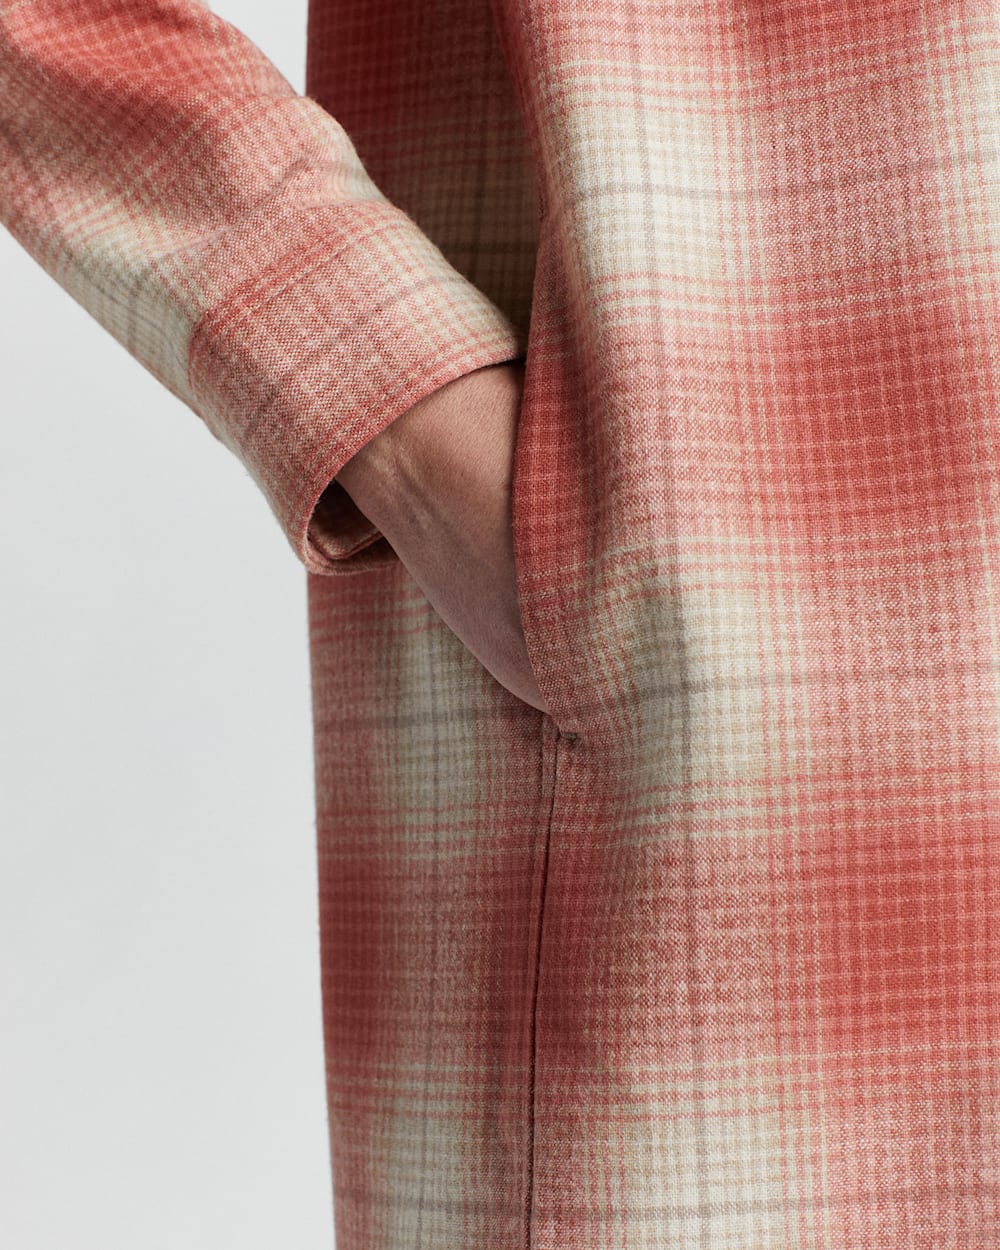 ALTERNATE VIEW OF WOMEN'S WOOL OVERSHIRT IN CORAL OMBRE PLAID image number 6